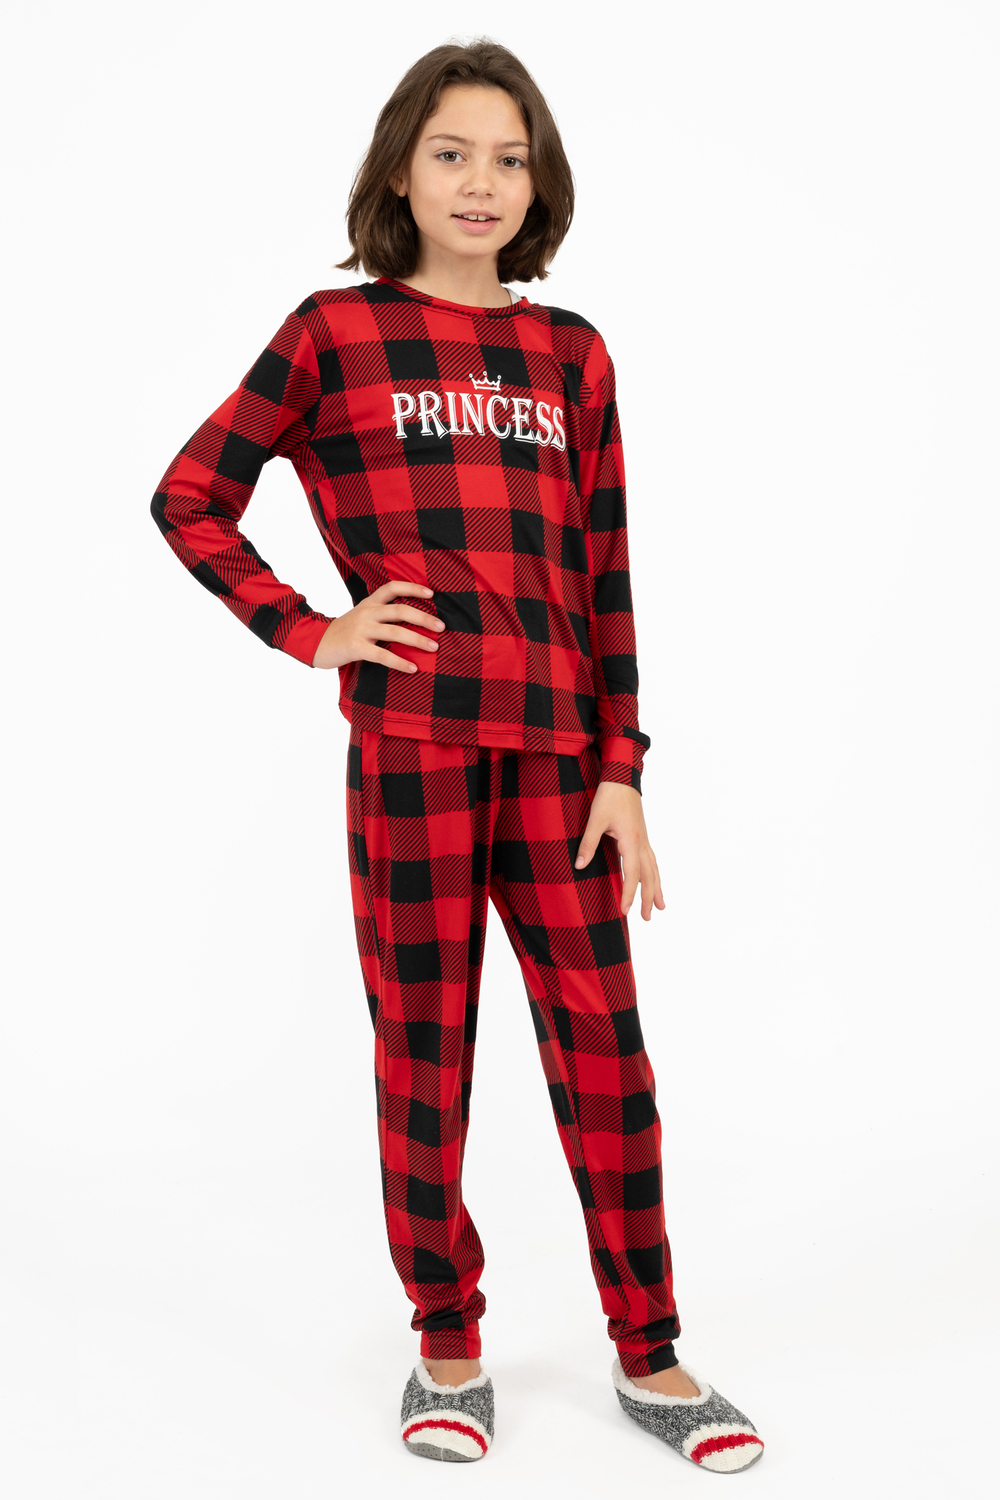 Our Fäm Jam - Matching family buffalo plaid PJ set - Royal Family. Colour:  red. Size: m